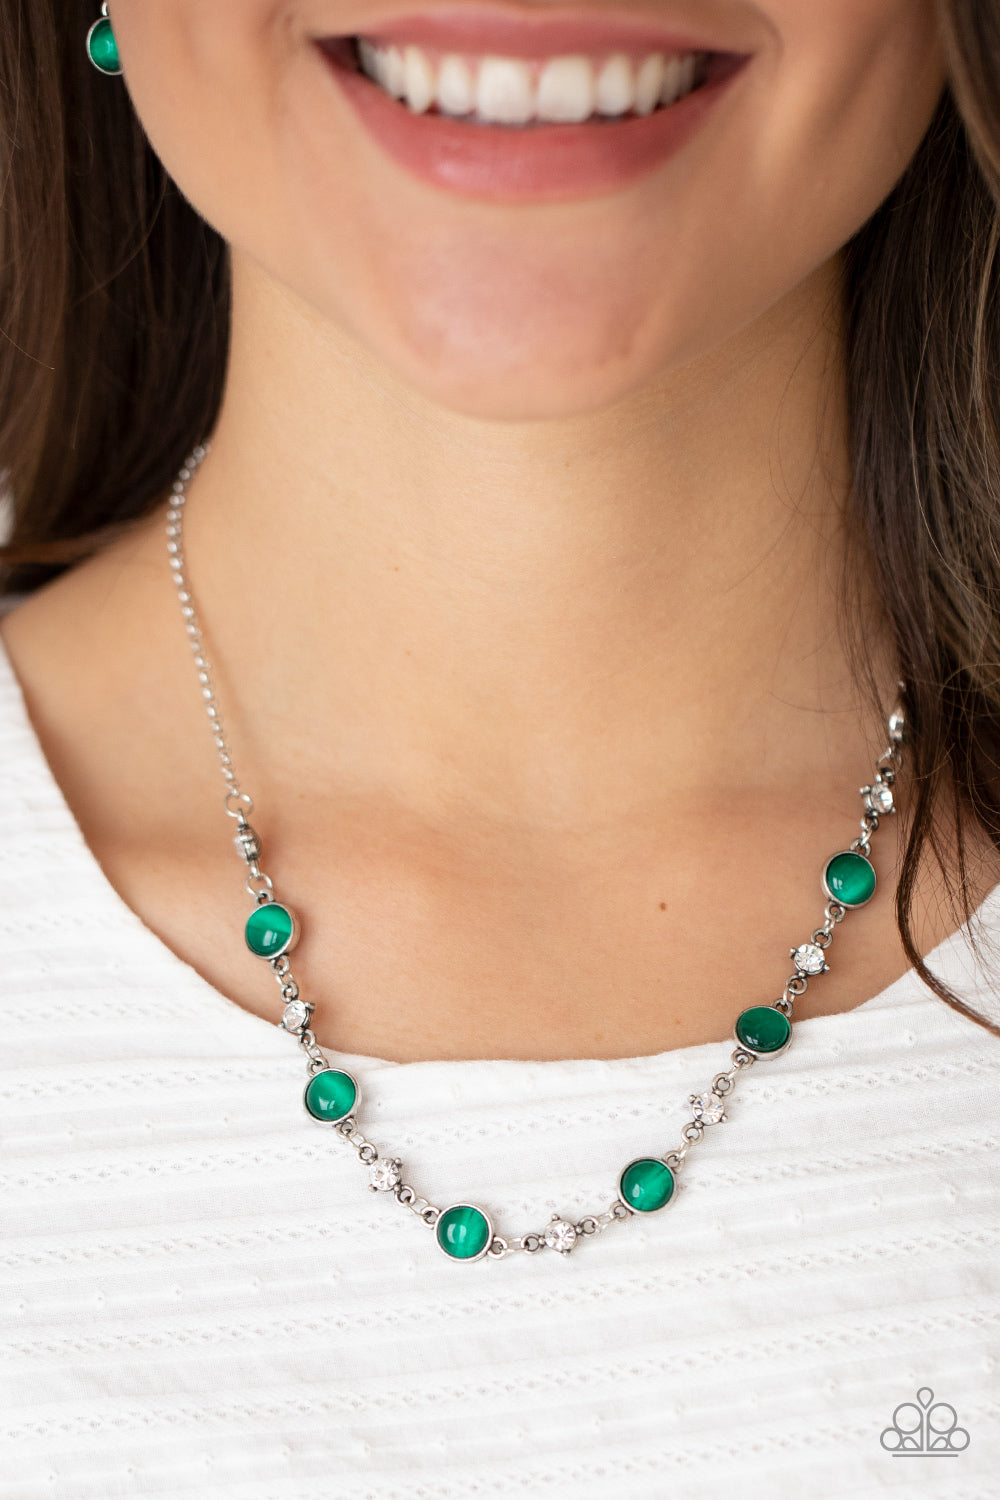 Inner Illumination Green Necklace - Paparazzi Accessories  Encased in antiqued silver fittings, dainty white rhinestones and glowing Mint cat's eye stones delicately link below the collar for a timeless finish. Features an adjustable clasp closure.  Sold as one individual necklace. Includes one pair of matching earrings.  Get The Complete Look!  Bracelet: "Use Your ILLUMINATION - Green" (Sold Separately)